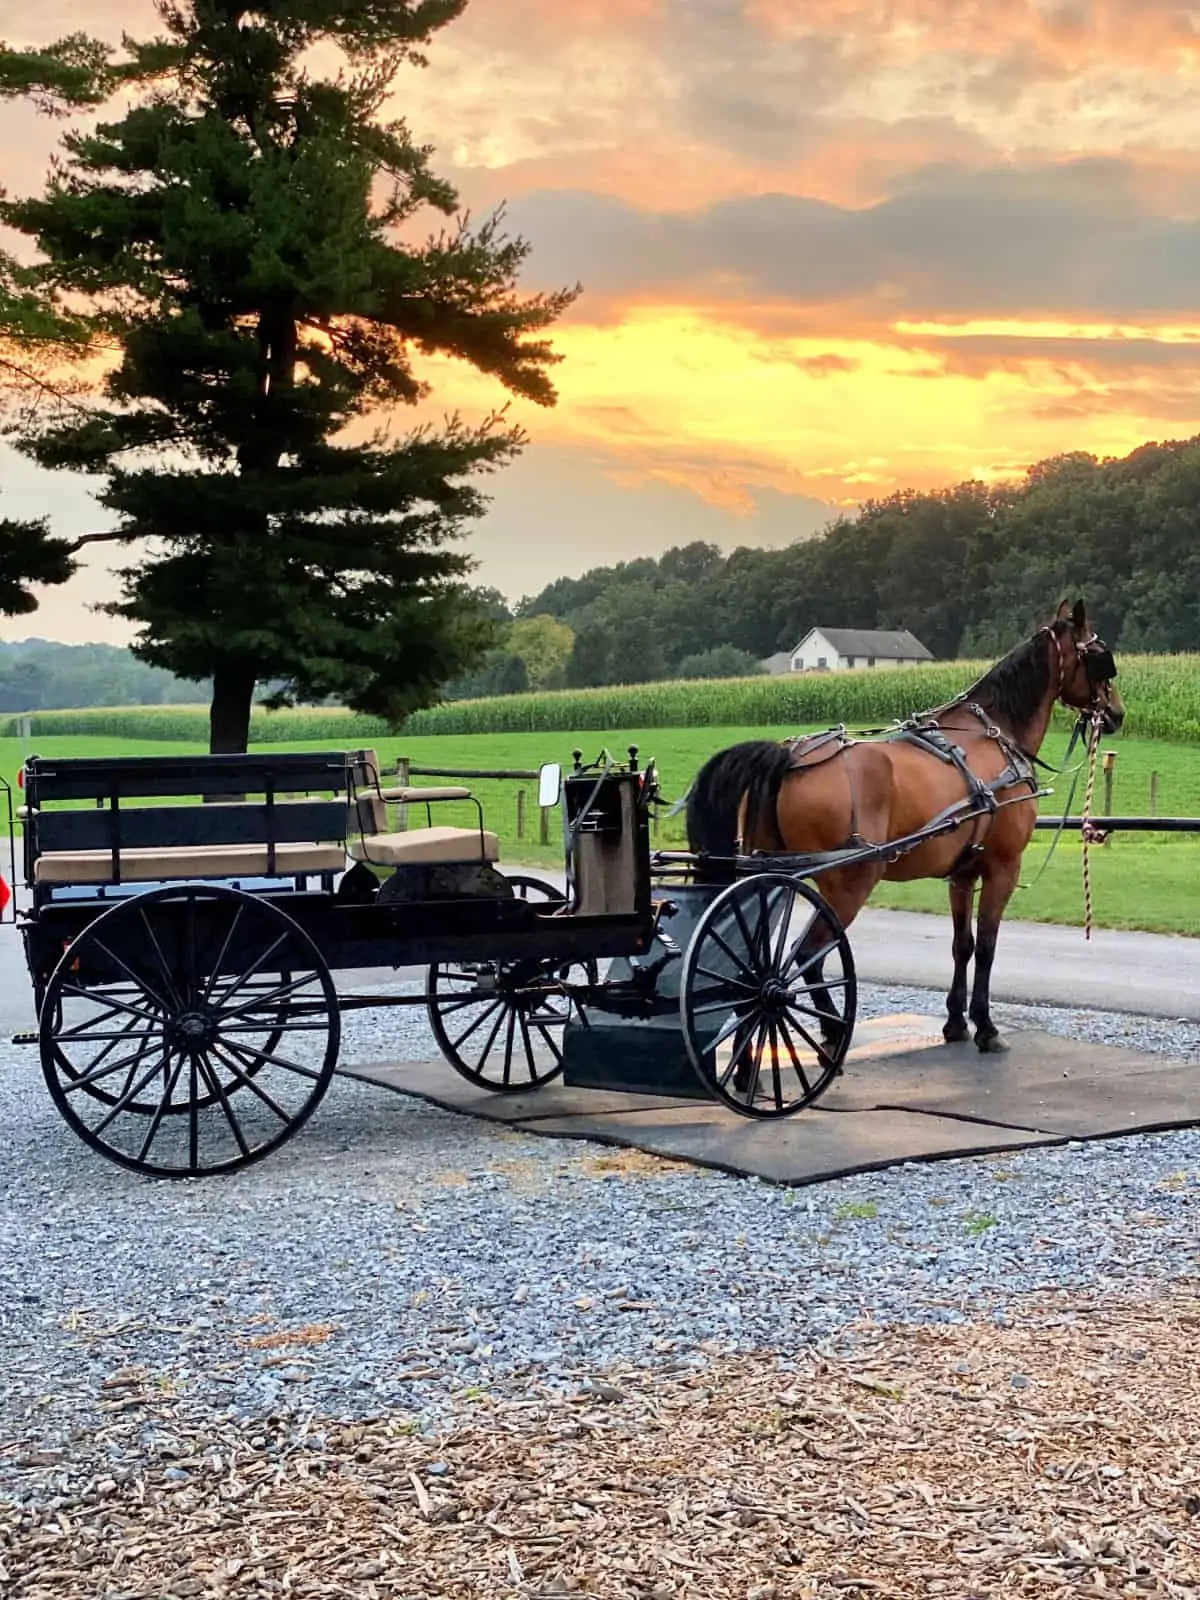 Amish horse and buggy on a farm.